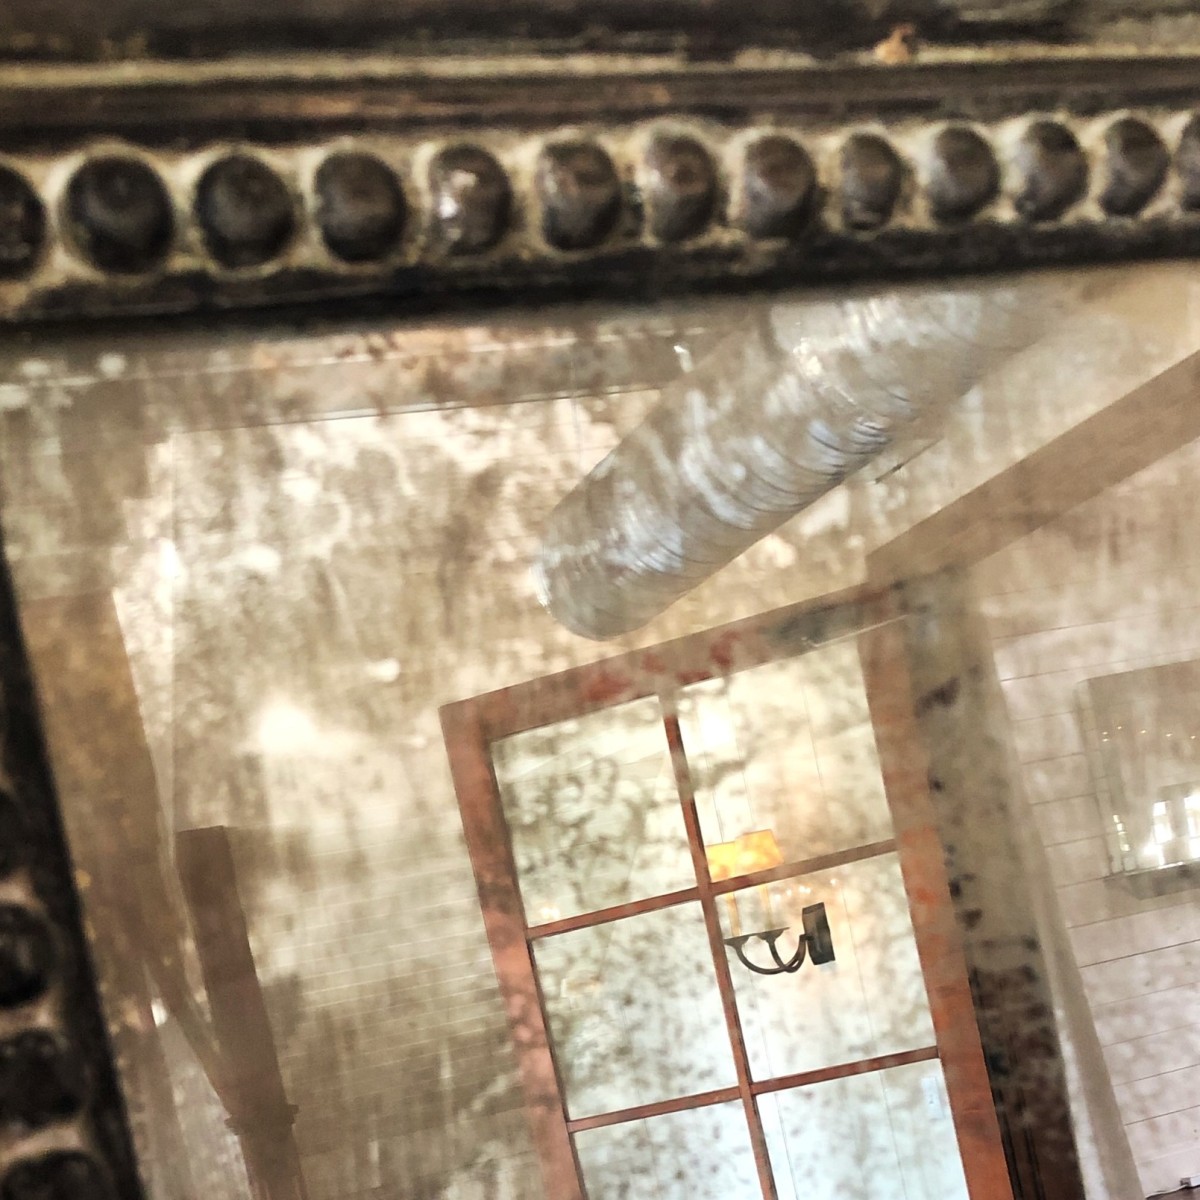 Fixing Black Spots On Mirrors Thriftyfun, How To Resilver An Antique Mirror